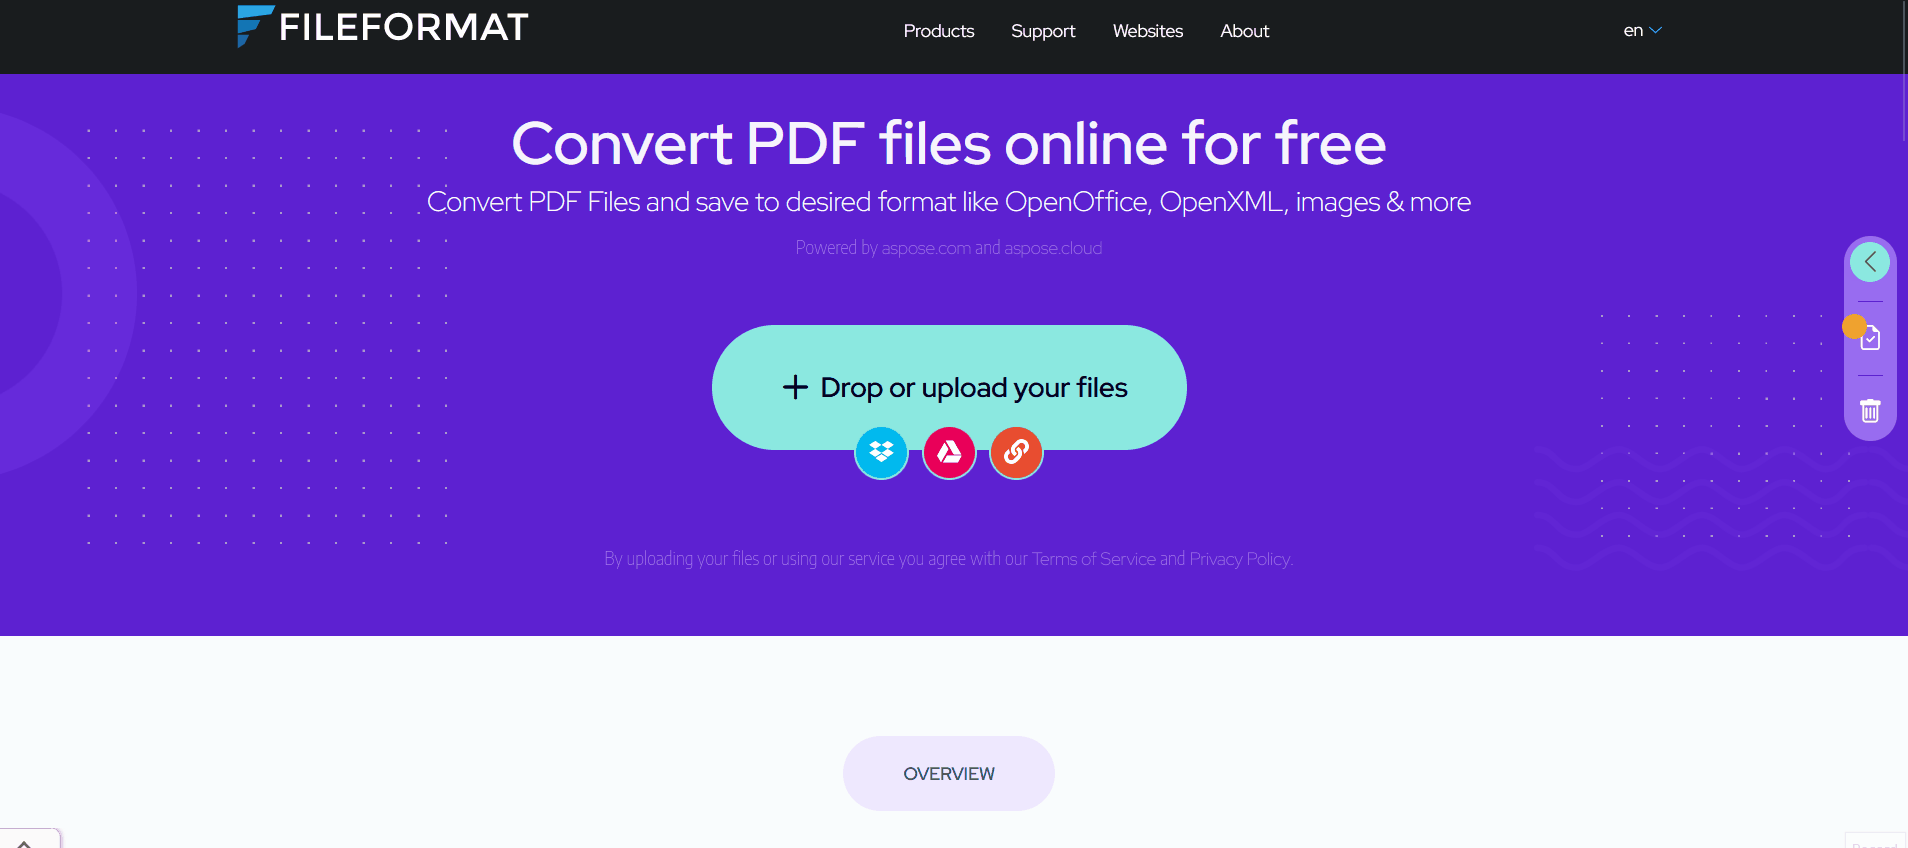 How to convert documents online